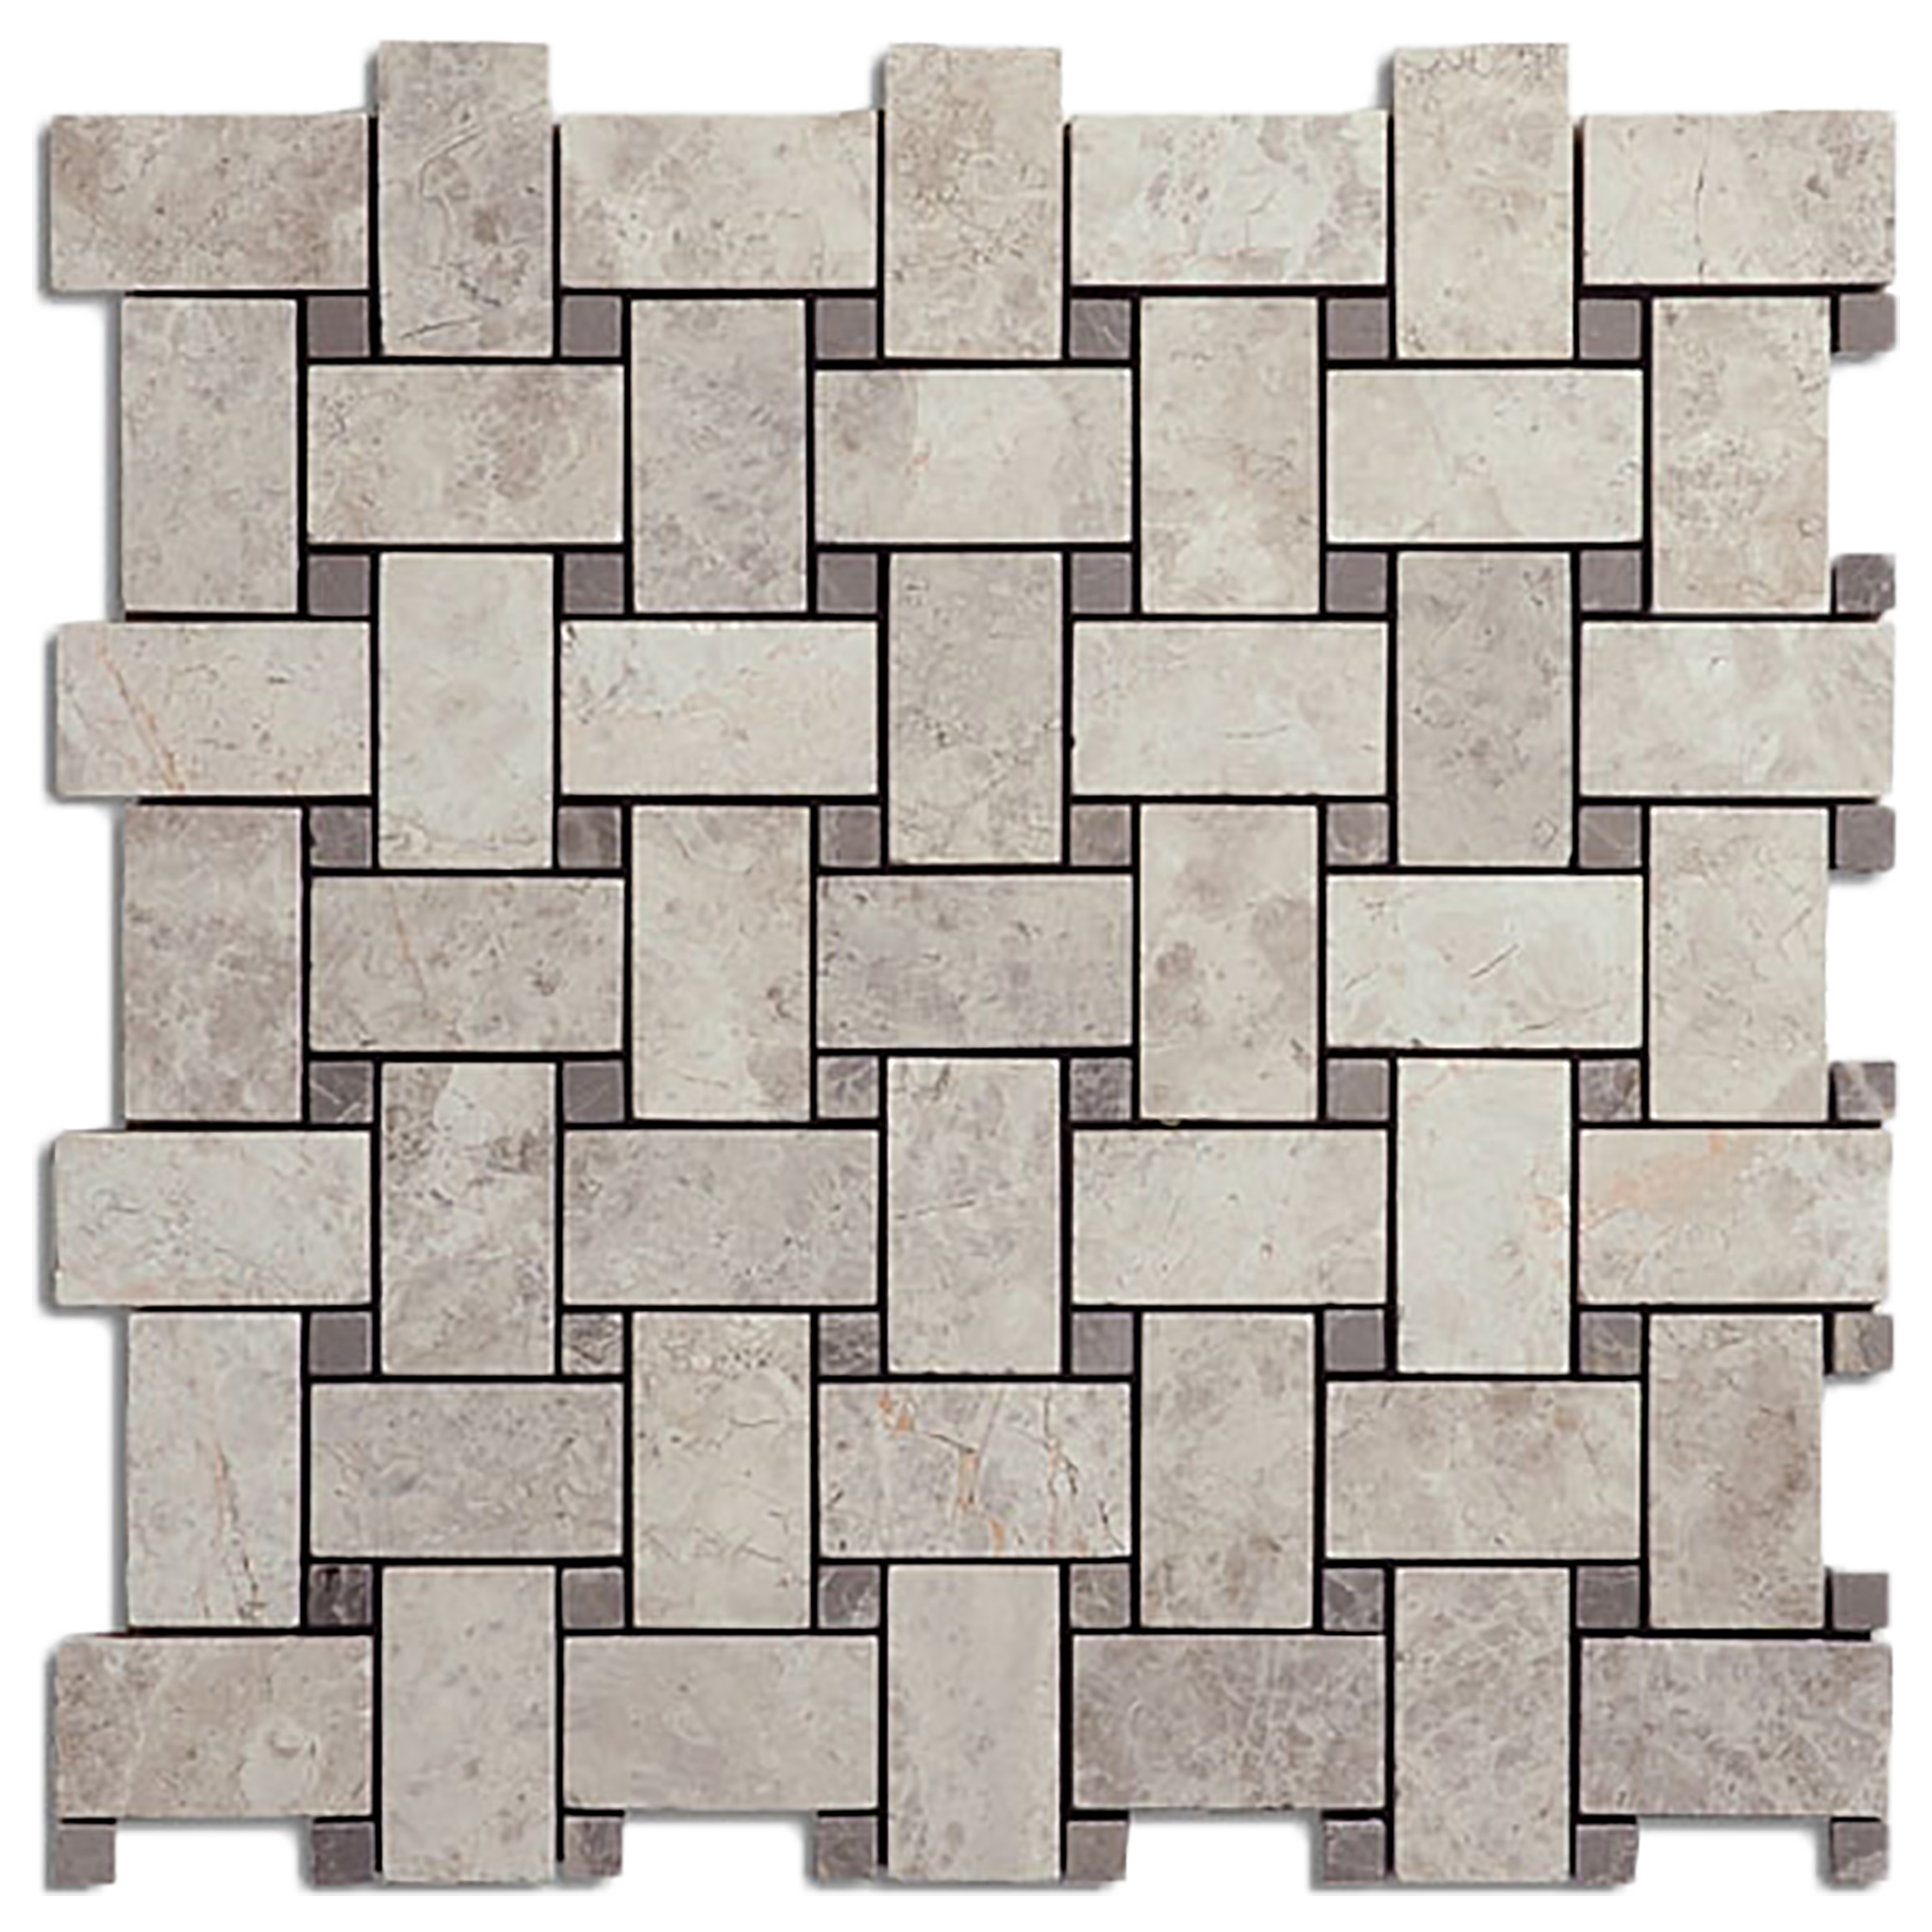 1-1/4"x2" Silver Shadow Marble Basketweave w/Royal Grey Mosaic Tile - Honed Honed / 12"x12" - DW TILE & STONE - Atlanta Marble Natural Stone Wholesale Stone Supplier